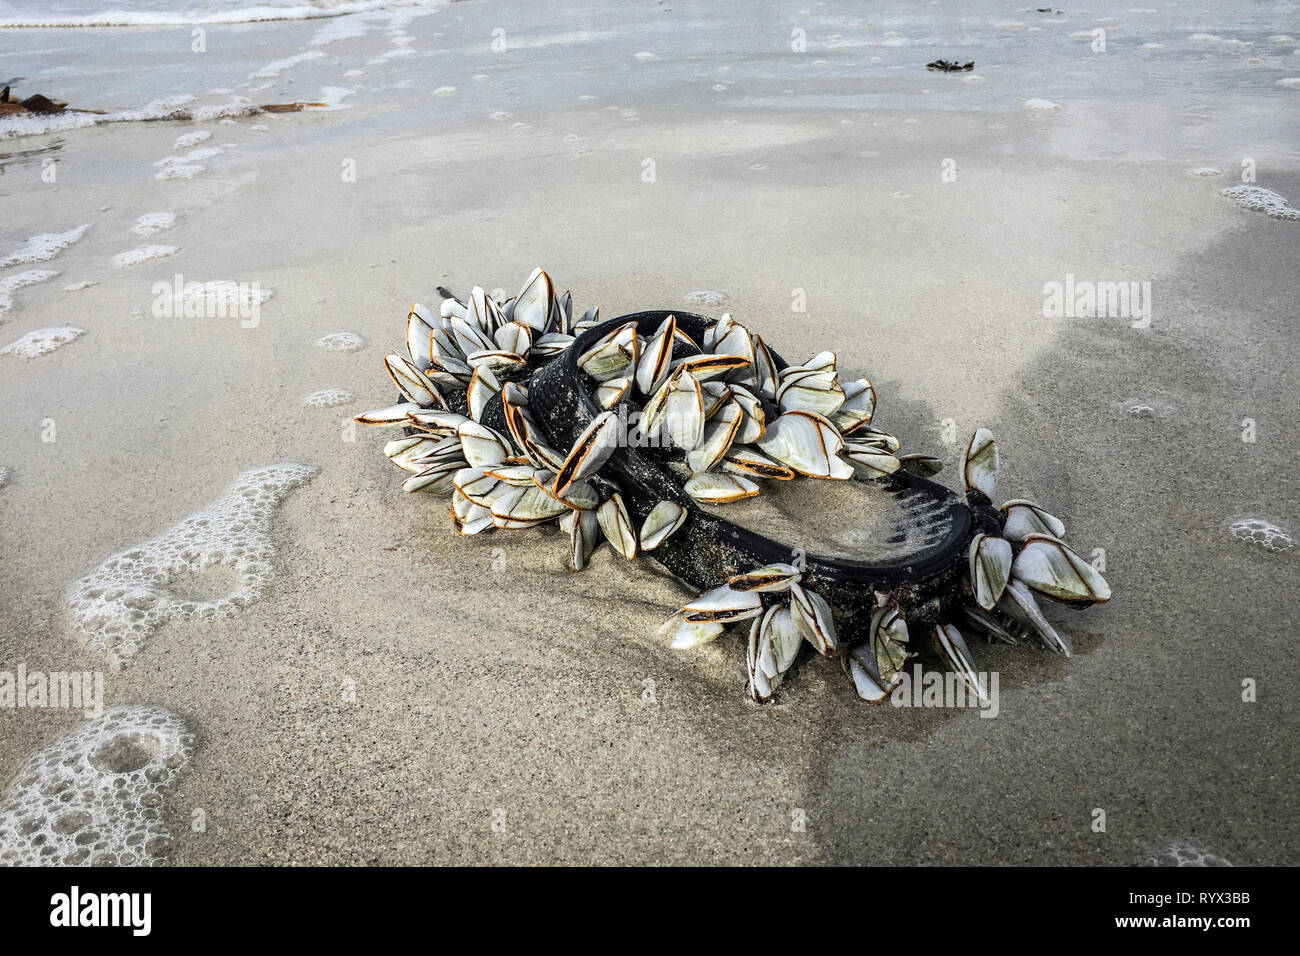 Marine pollution on a beach in Brittany (north-western France). Shells on a plastic sandal Stock Photo